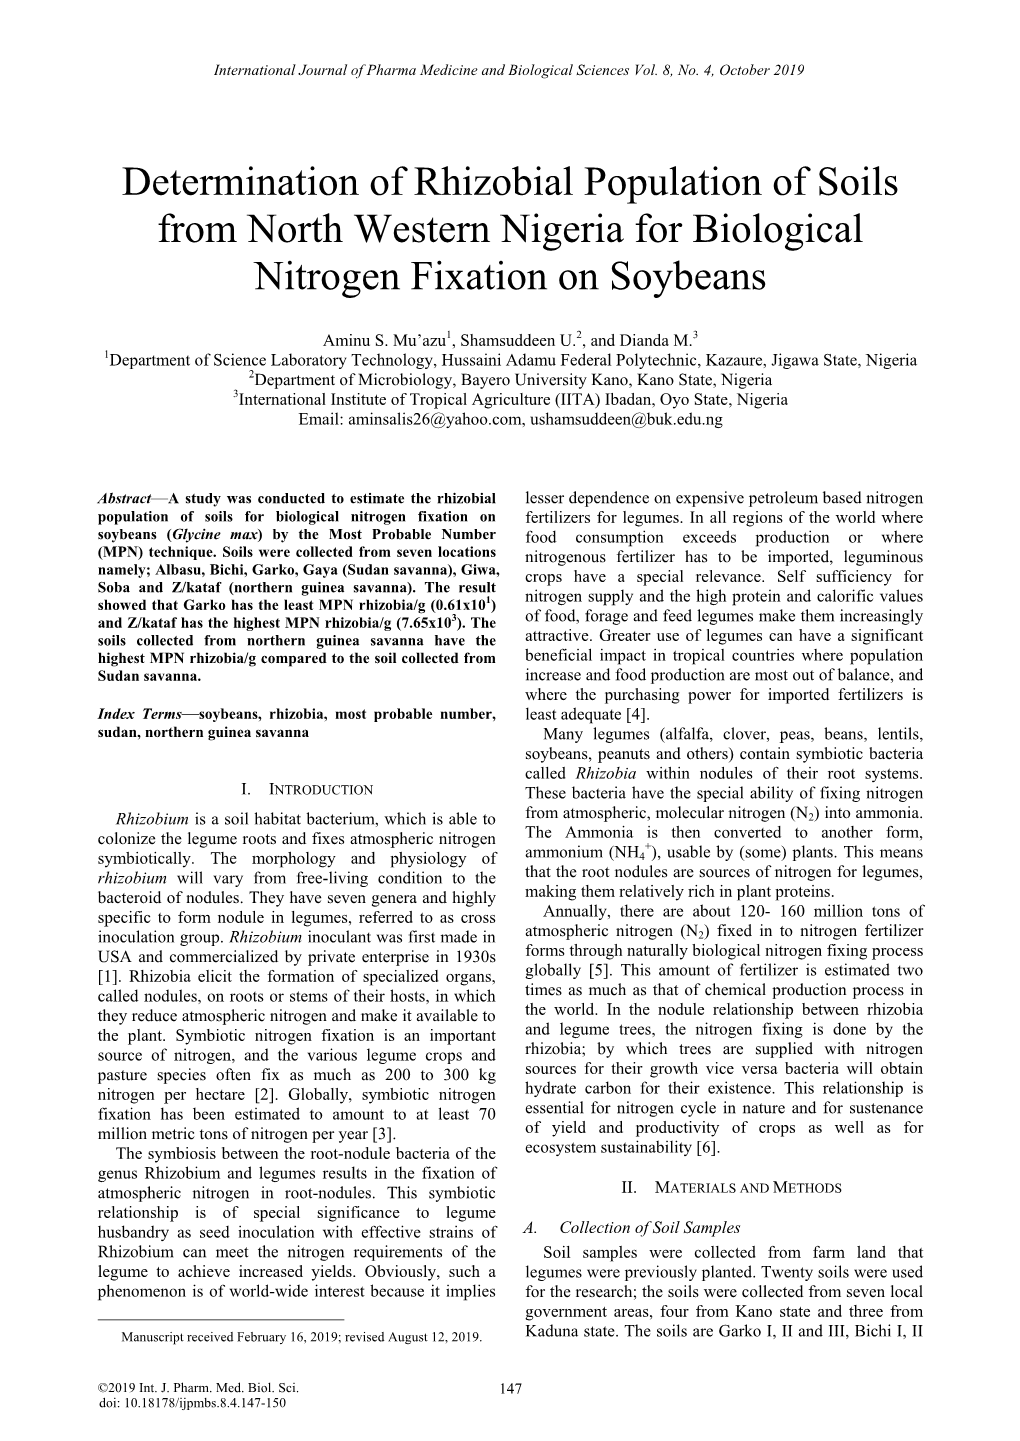 Determination of Rhizobial Population of Soils from North Western Nigeria for Biological Nitrogen Fixation on Soybeans